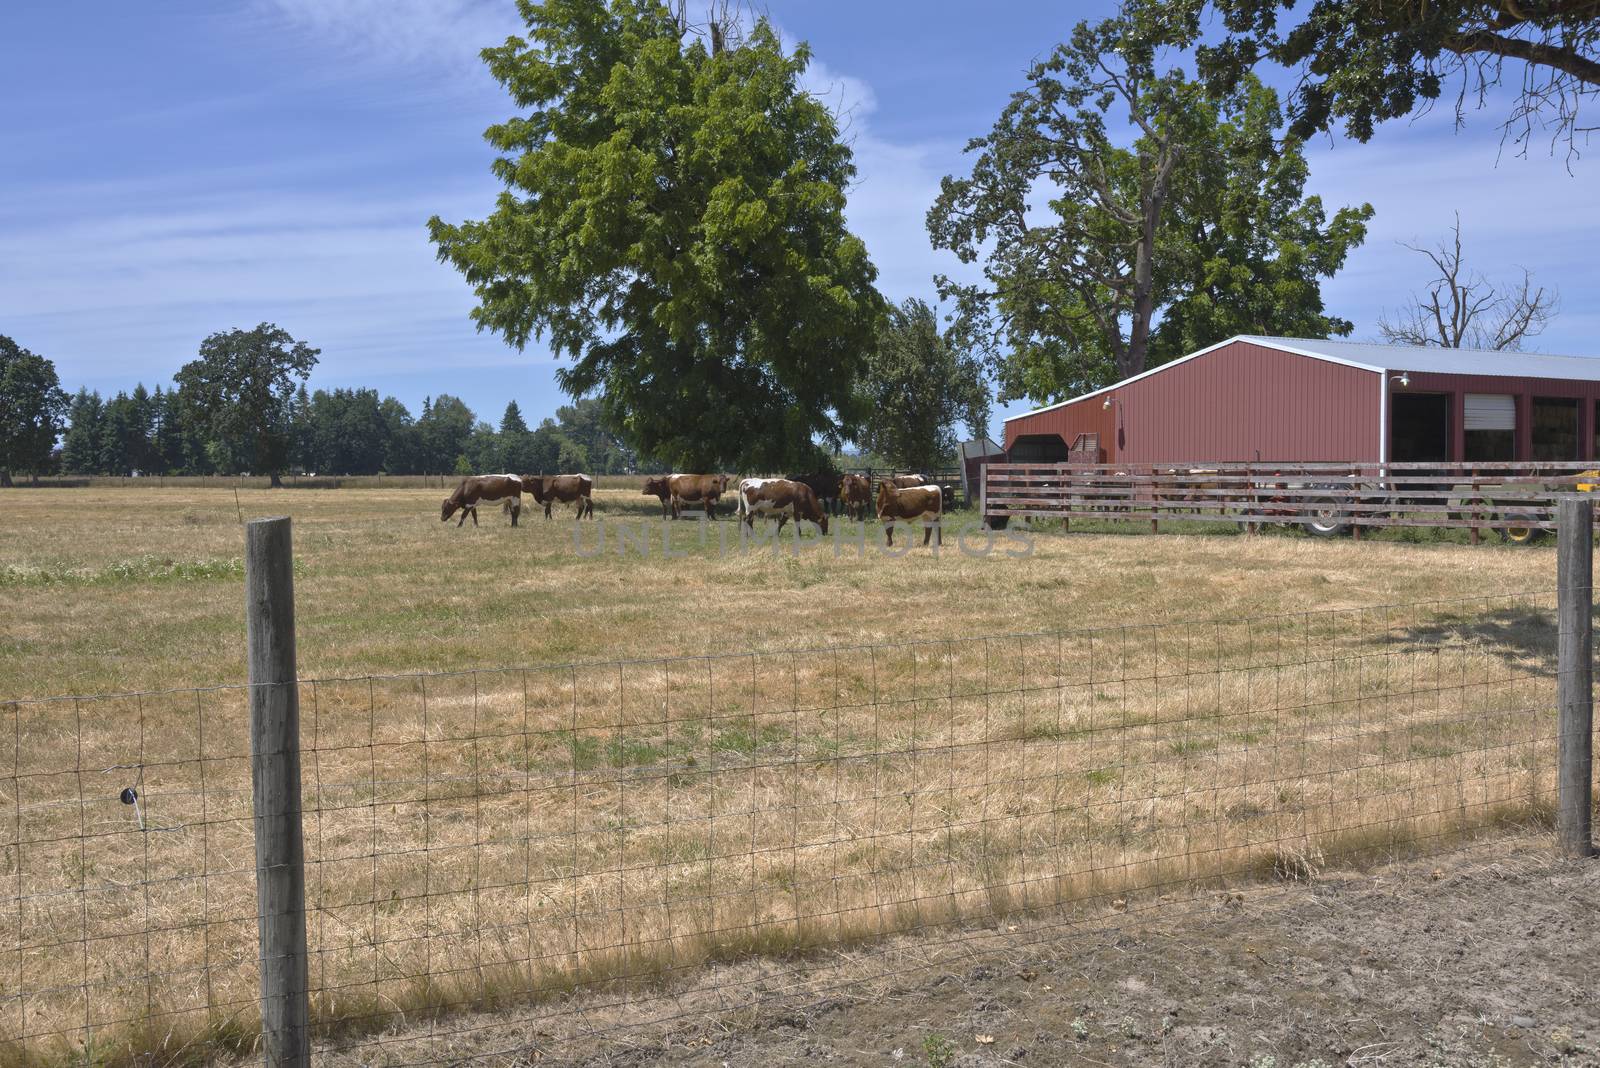 Cattles in a country farm Willamette valley Oregon.